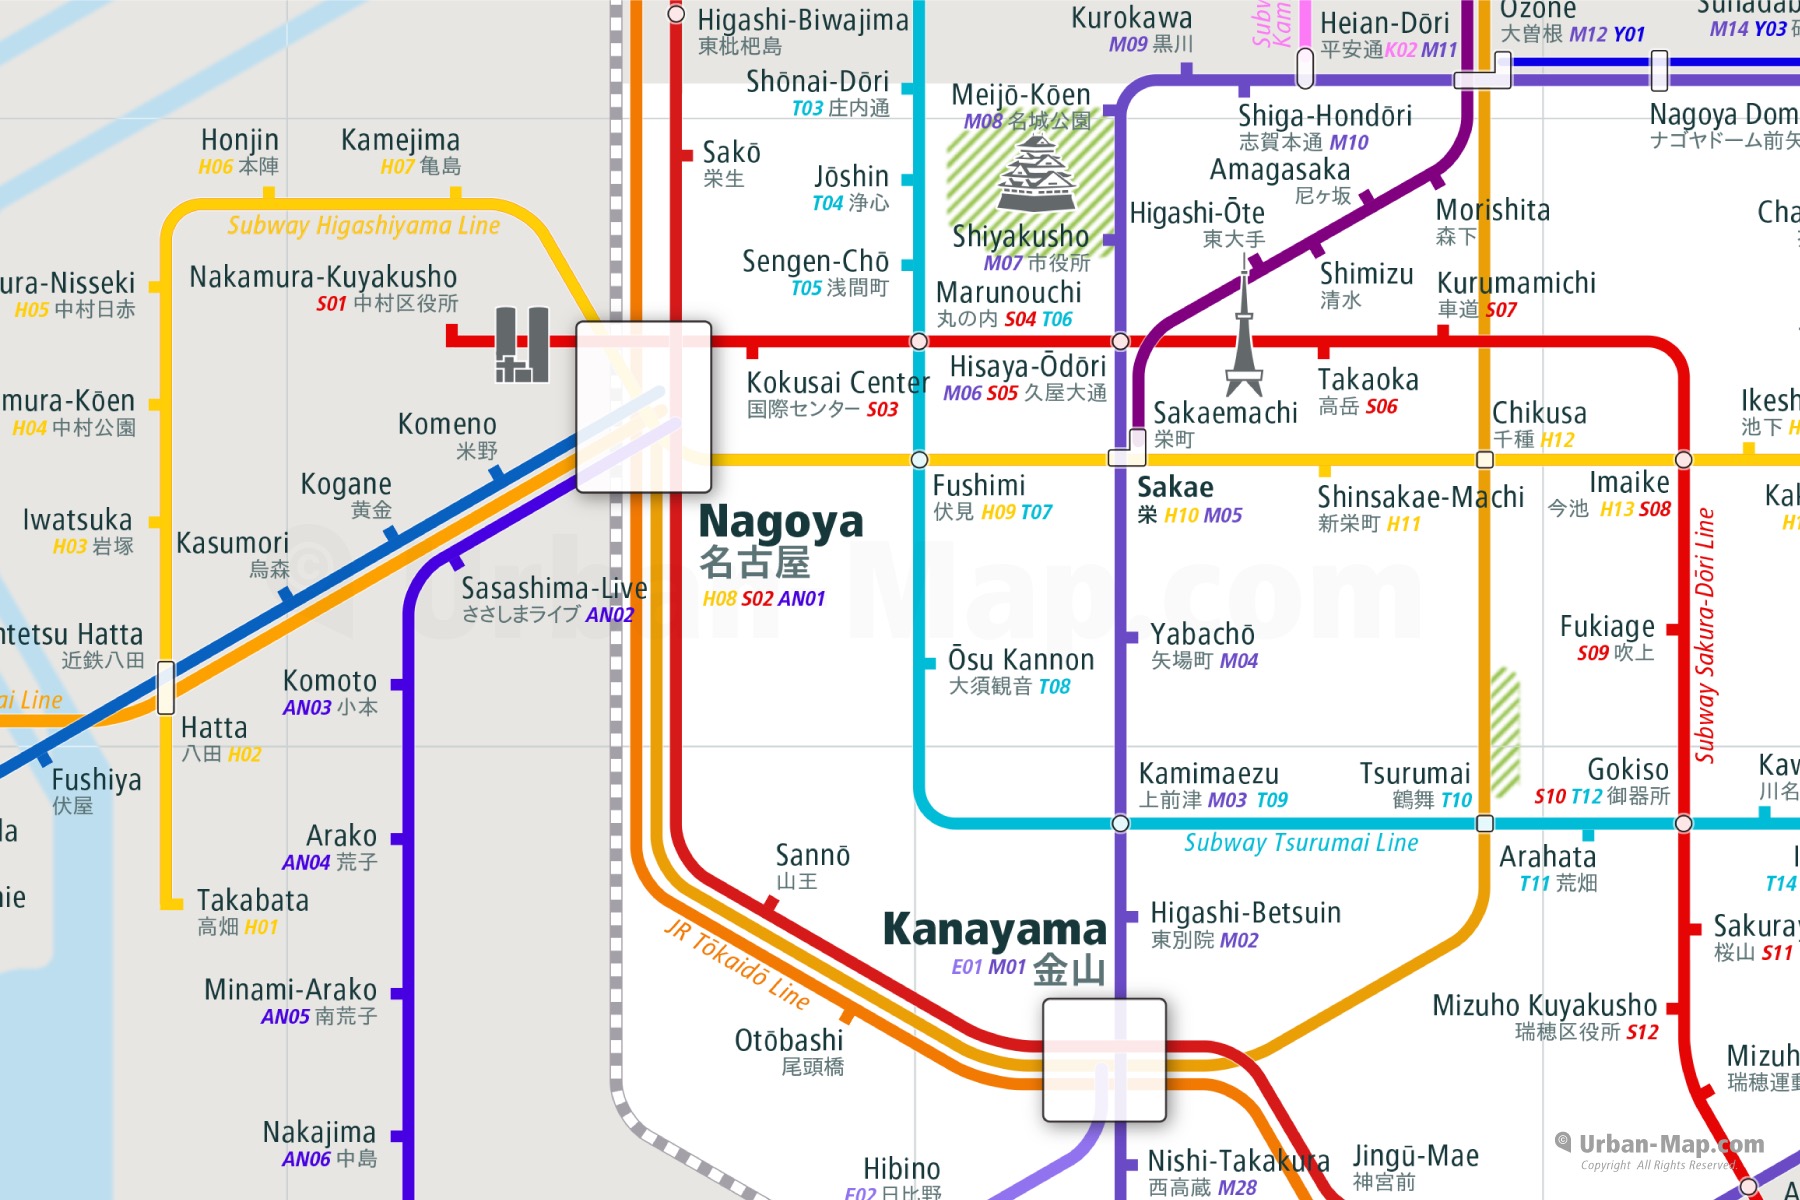 Nagoya City Rail Map shows the train and public transportation routes of